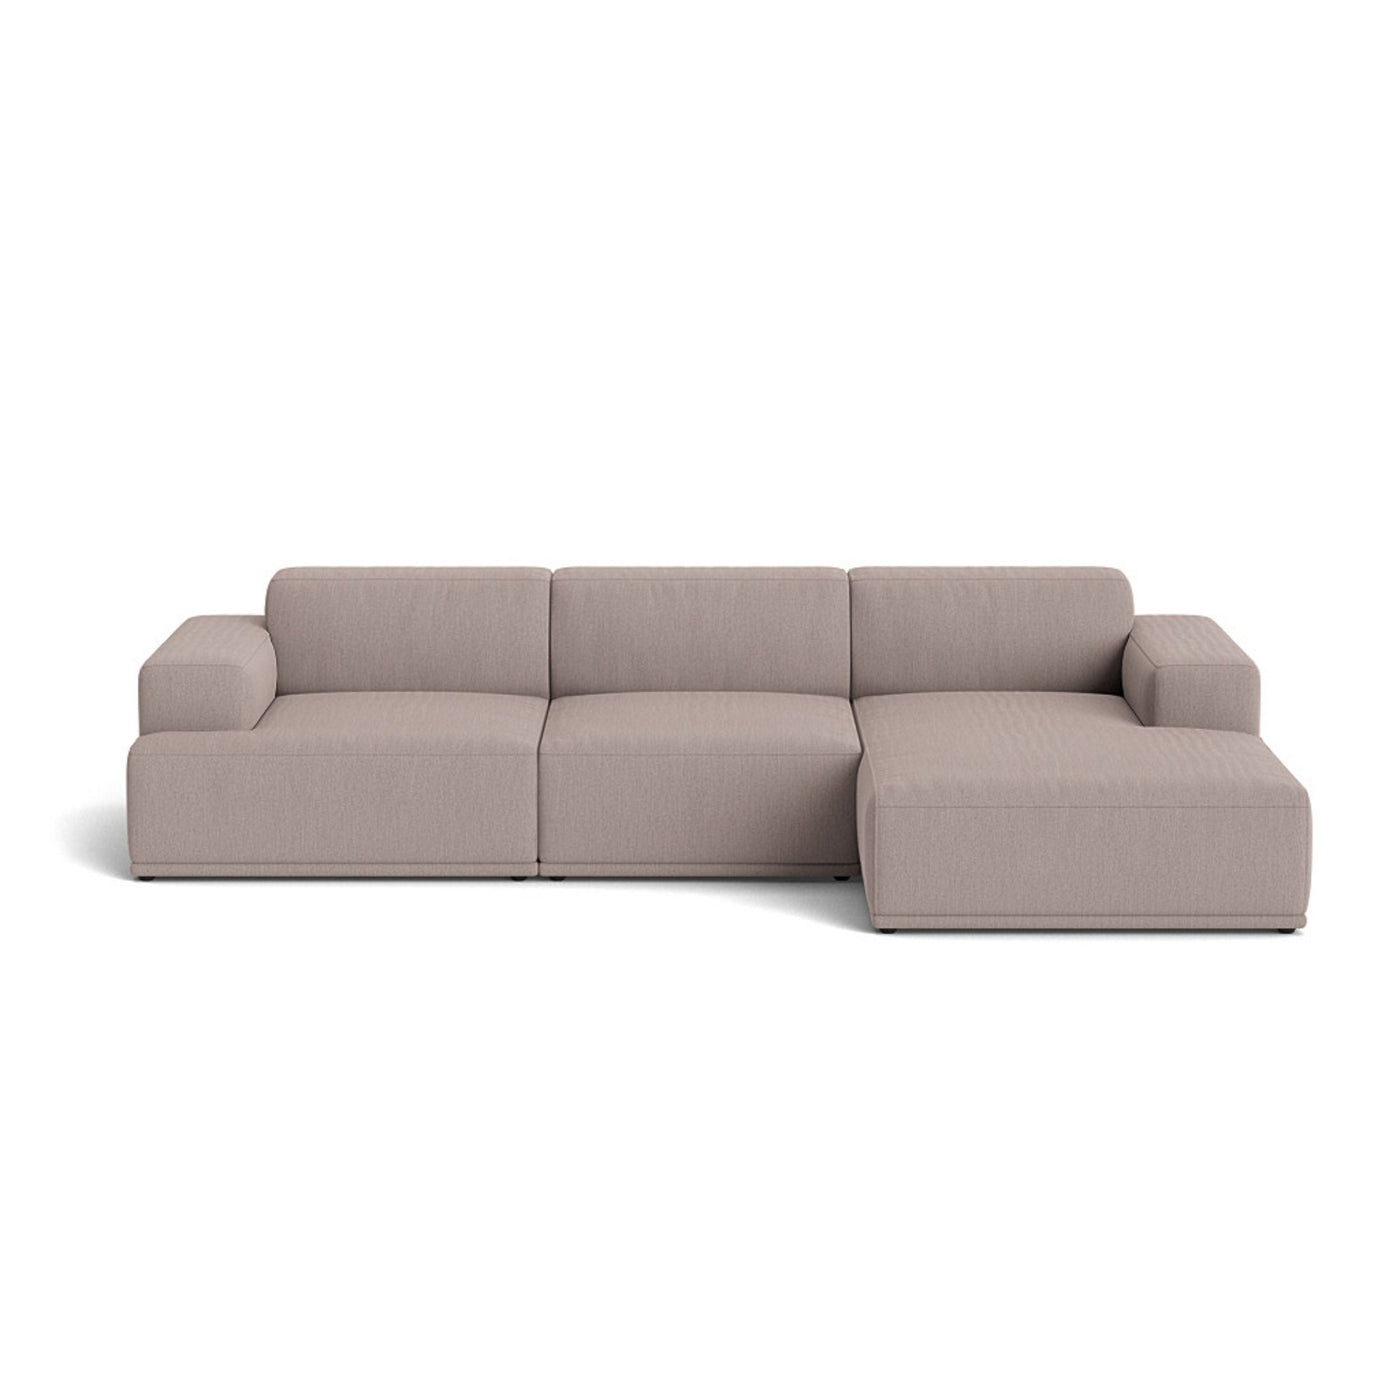 Muuto Connect Soft Modular 3 Seater Sofa, configuration 3. Made-to-order from someday designs. #colour_re-wool-628